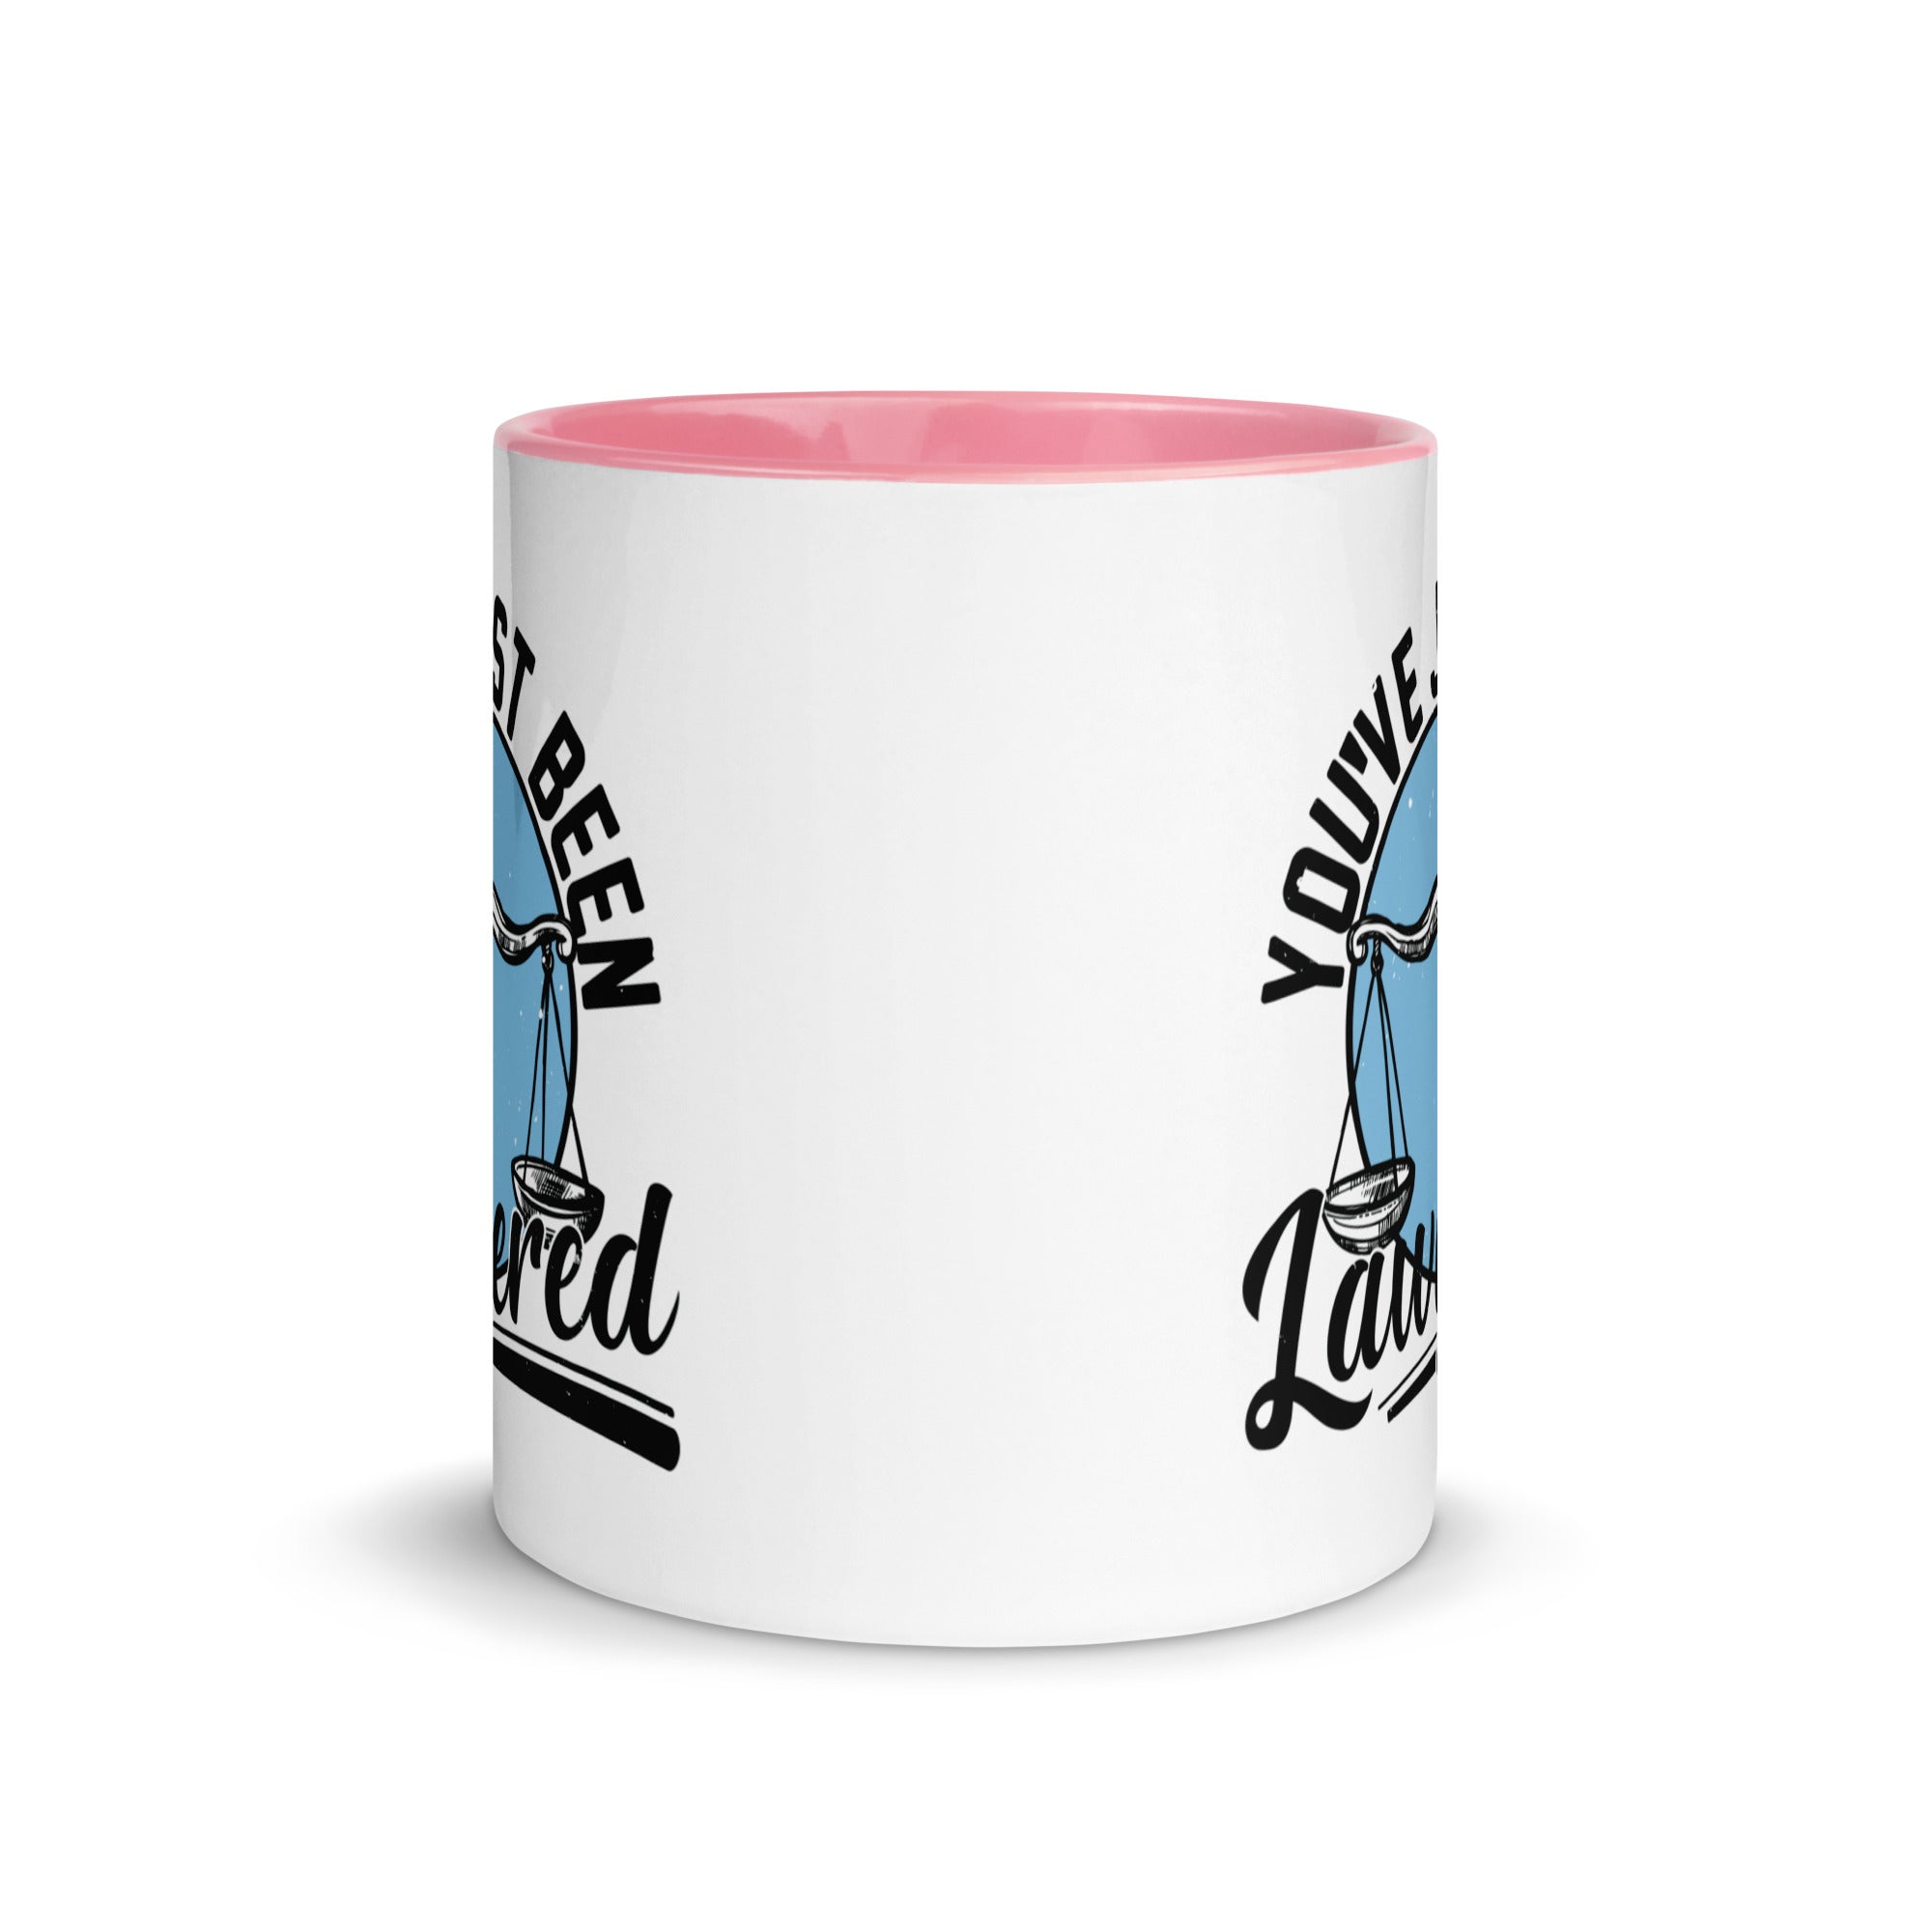 Mug with Color Inside | You've just been lawyered